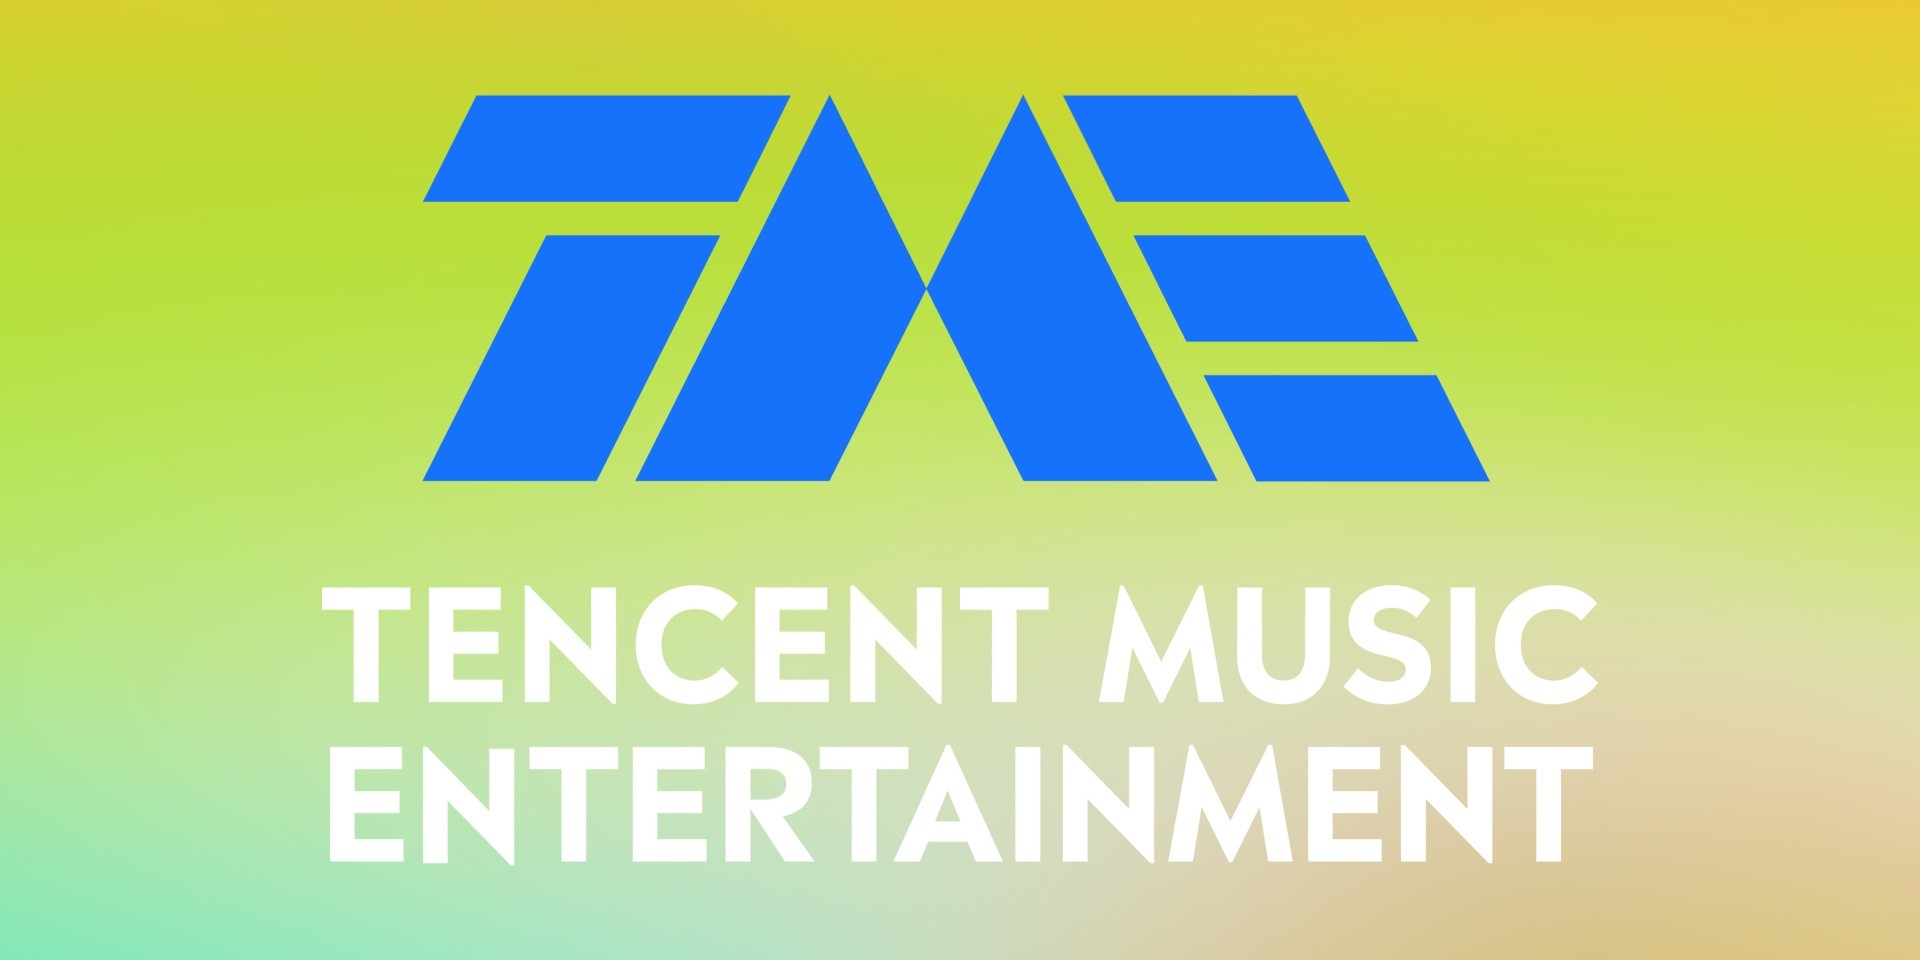 Tencent Music Entertainment announces recipients of the first digital commemorative trophy in China’s music industry